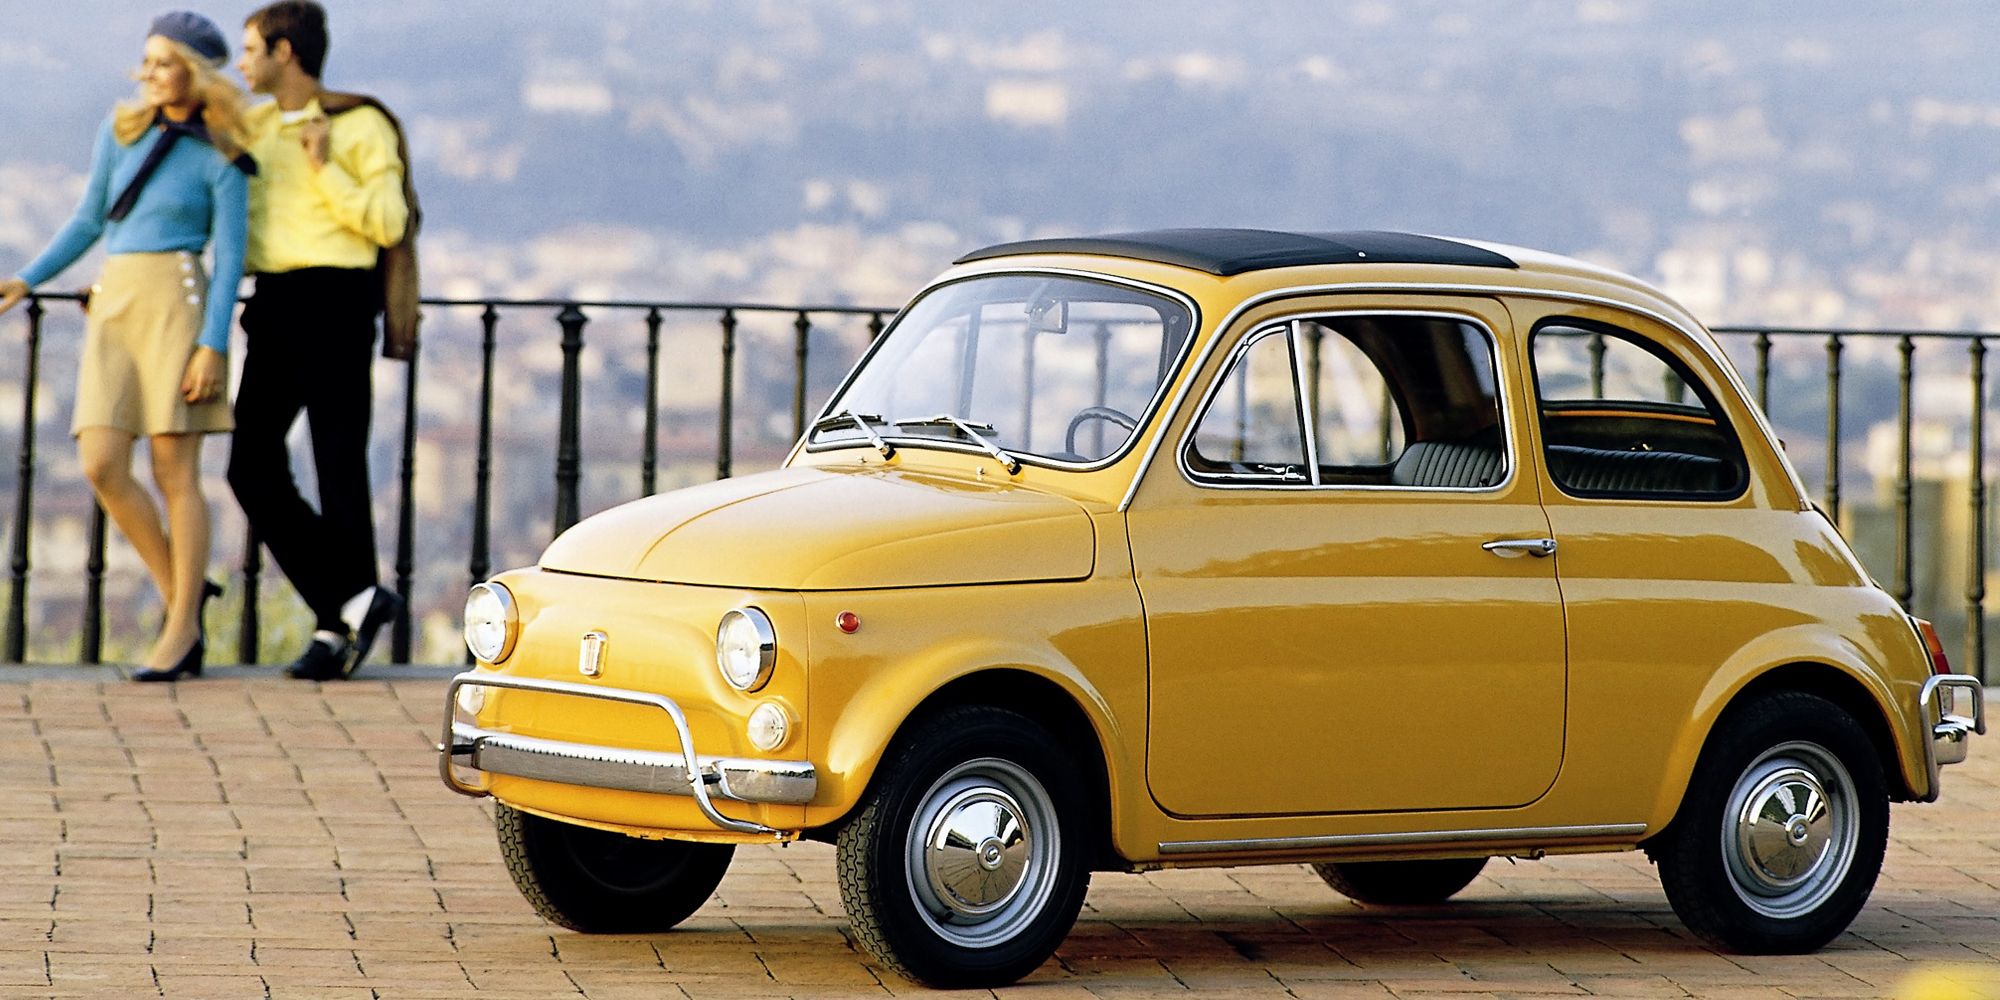 A yellow Fiat 500